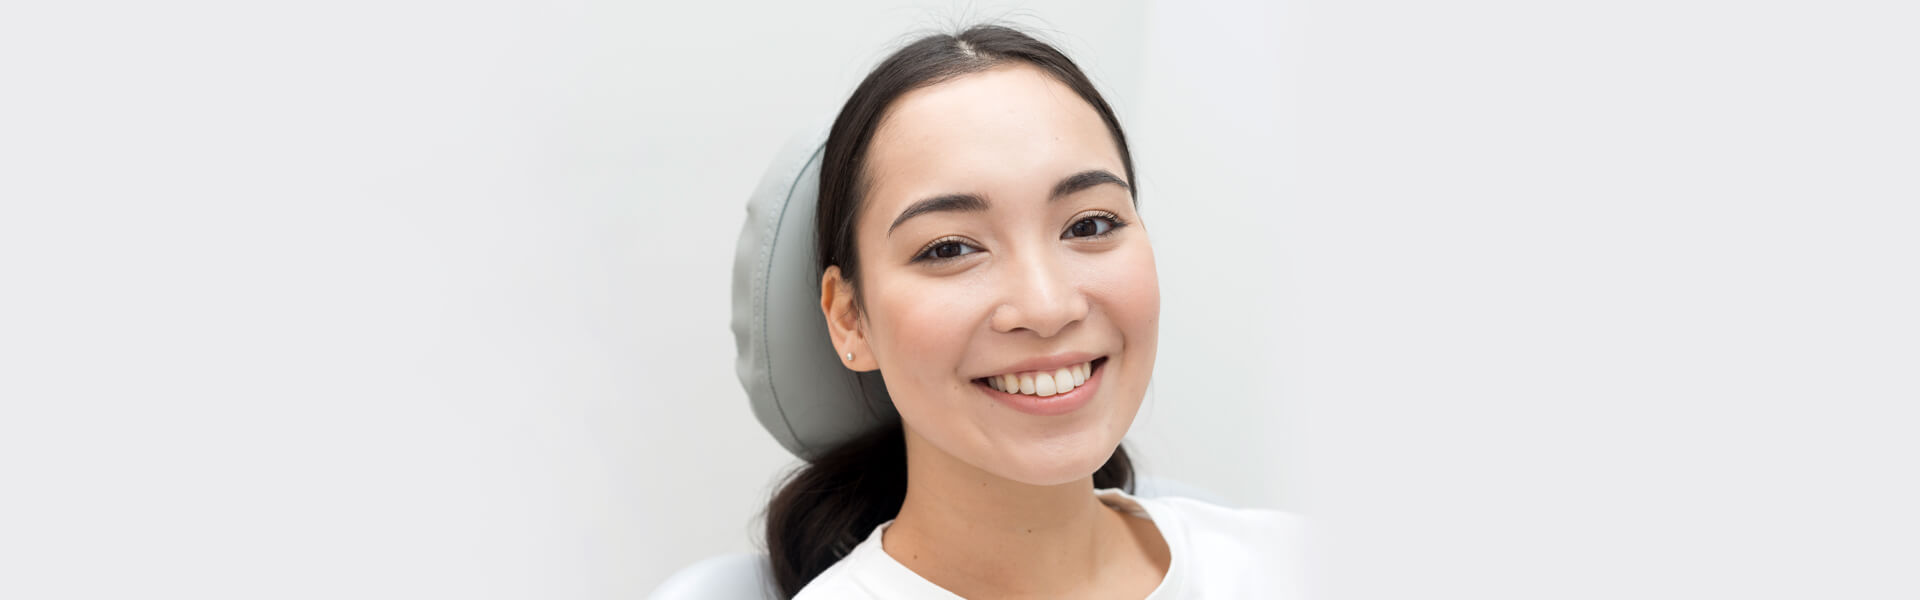 Root Canal Therapy in Rockville, MD